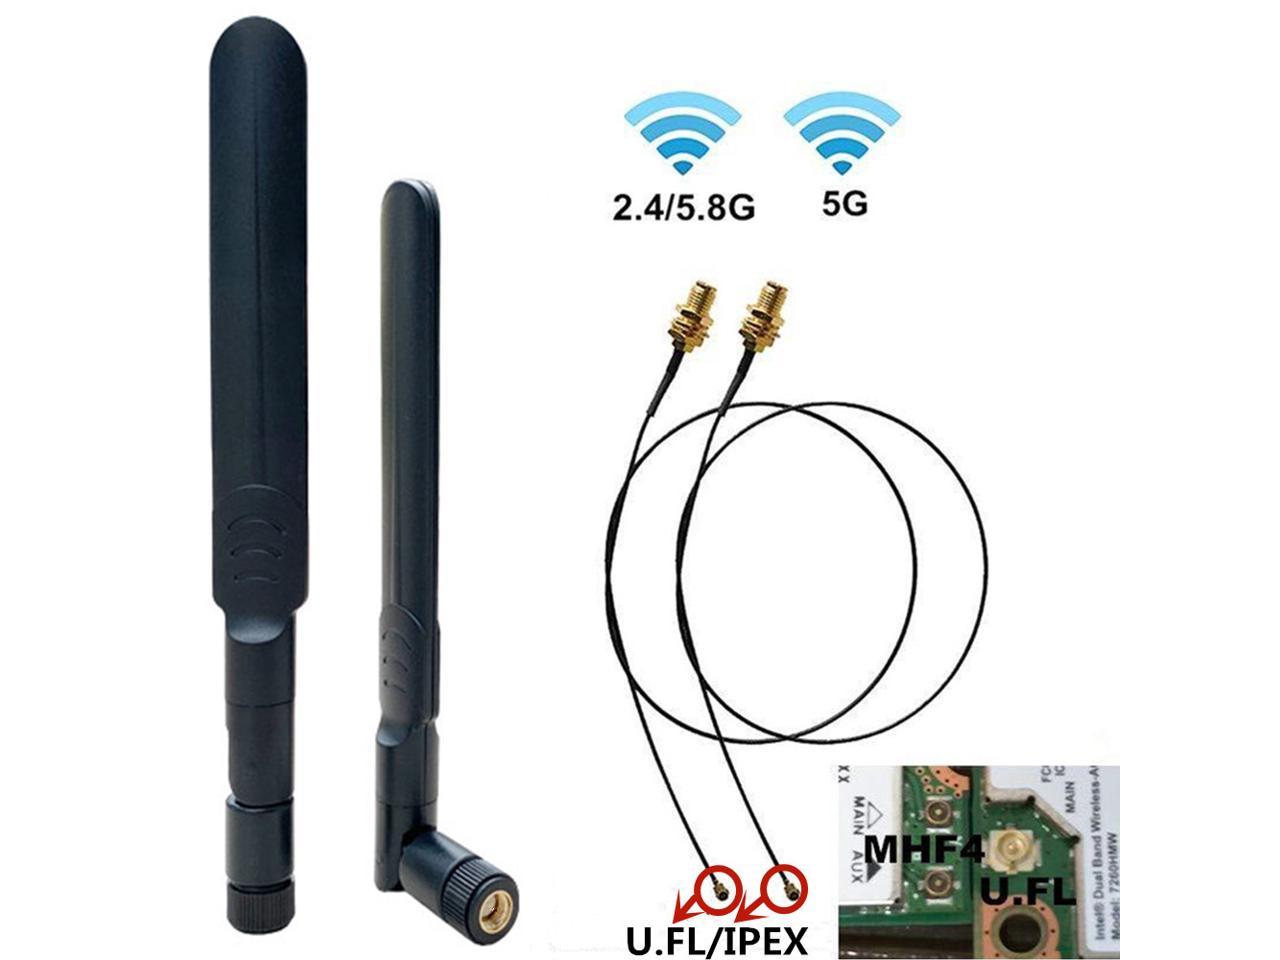 New Dual Band 2.4/5.8Ghz 2dBi RP-SMA Antenna for Wireless LAN Router 